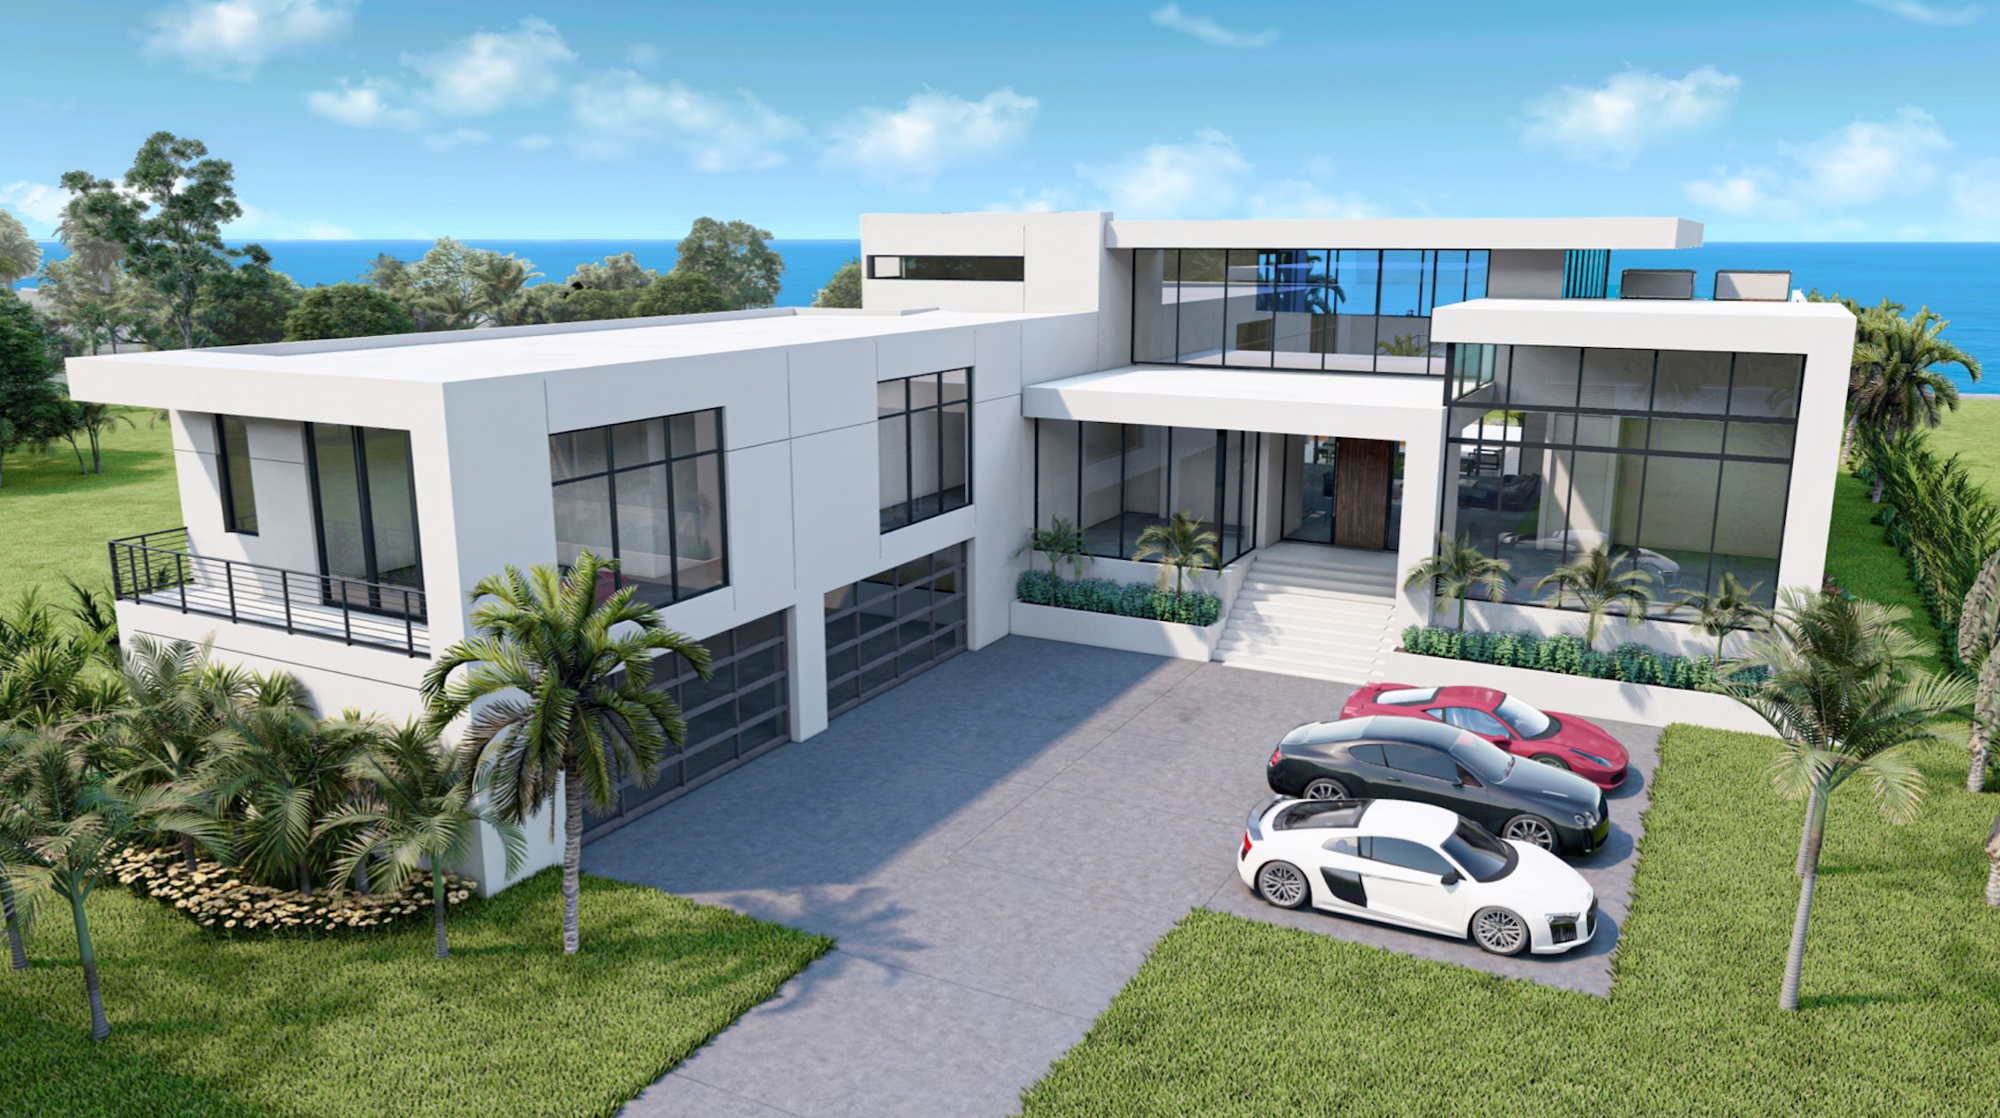 For the automobile enthusiast, the garage in the new $16.99 million home at Higel Avenue on Siesta Key can park 16 vehicles should the owner choose to add four lifts. (Courtesy of Seaward Development)